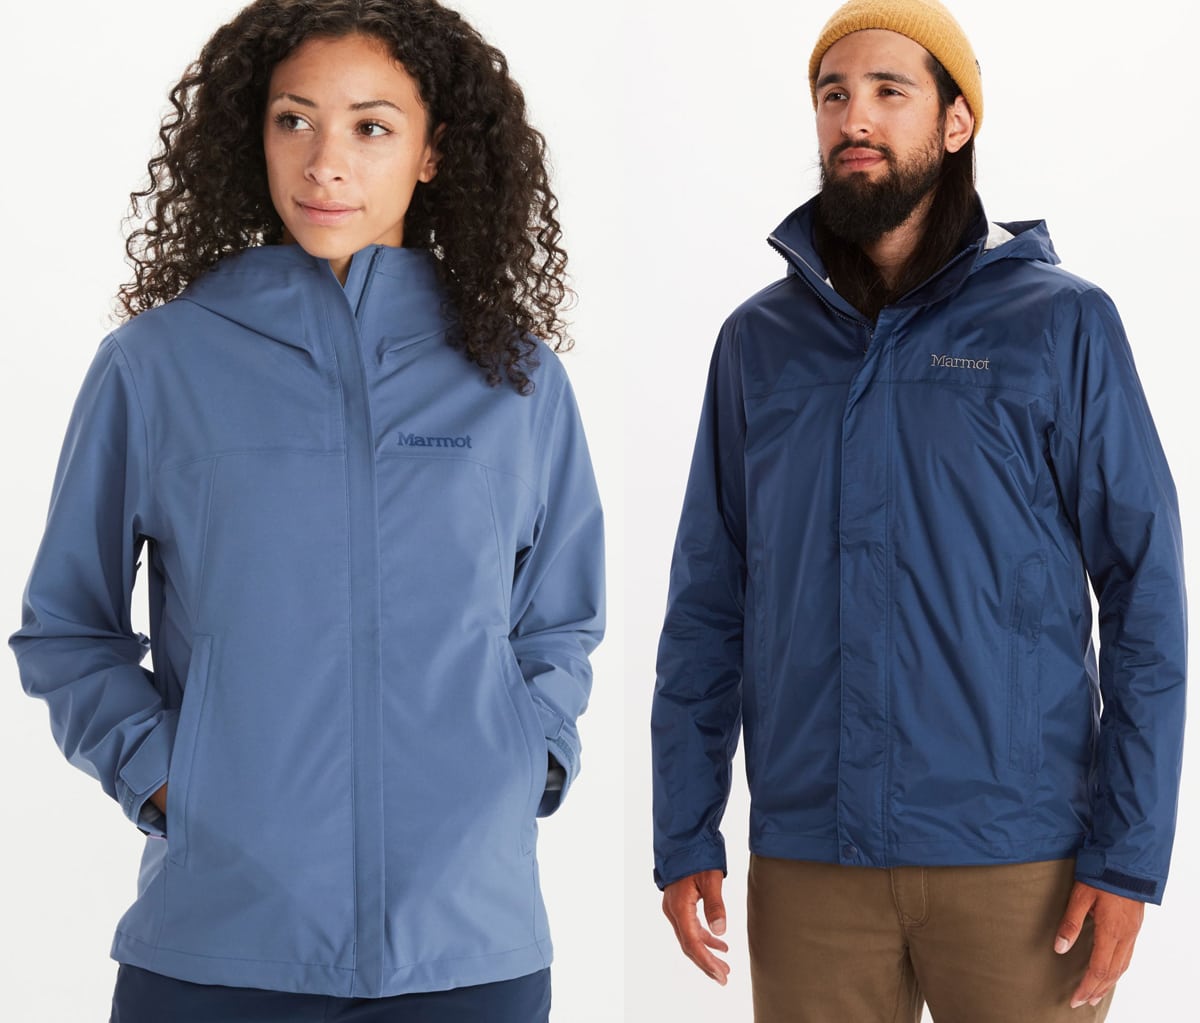 Marmot offers a range of products under the PreCip Eco Family collection, made using 100% recycled, bluesign-approved fabric and PFC-free DWR